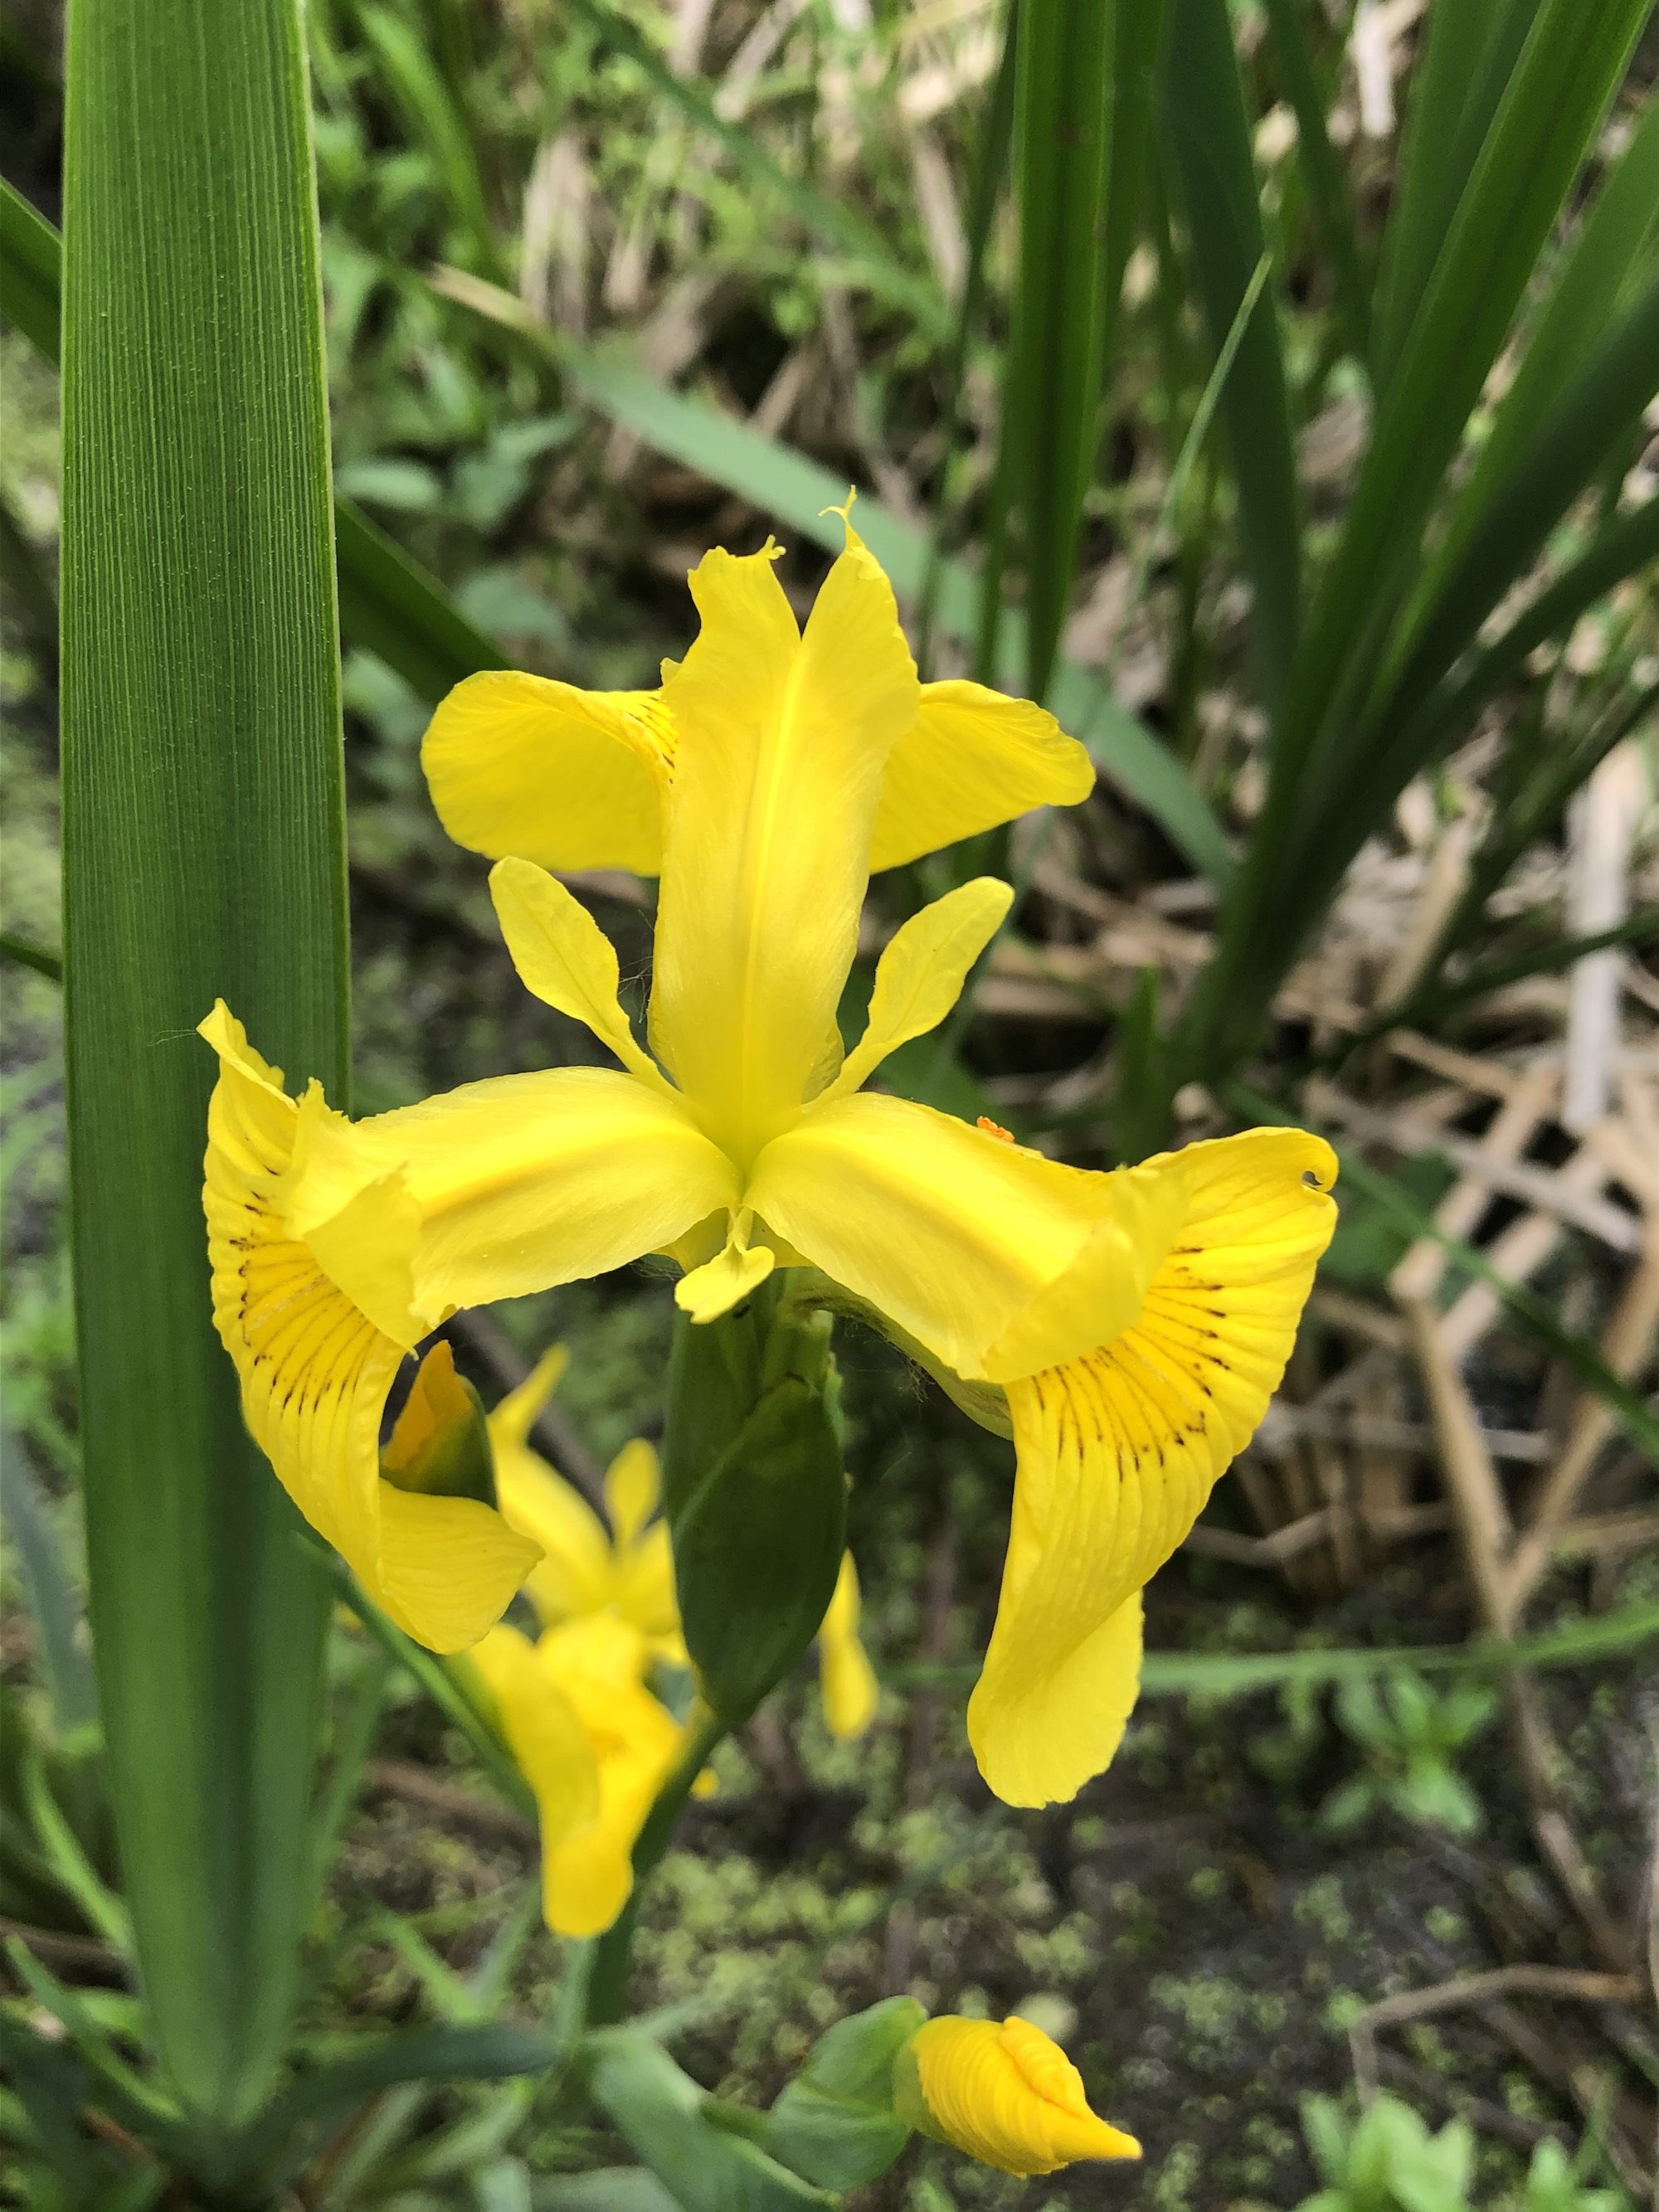 Yellow Flag Iris by Cattails on Lake Wingra on June 5, 2020.